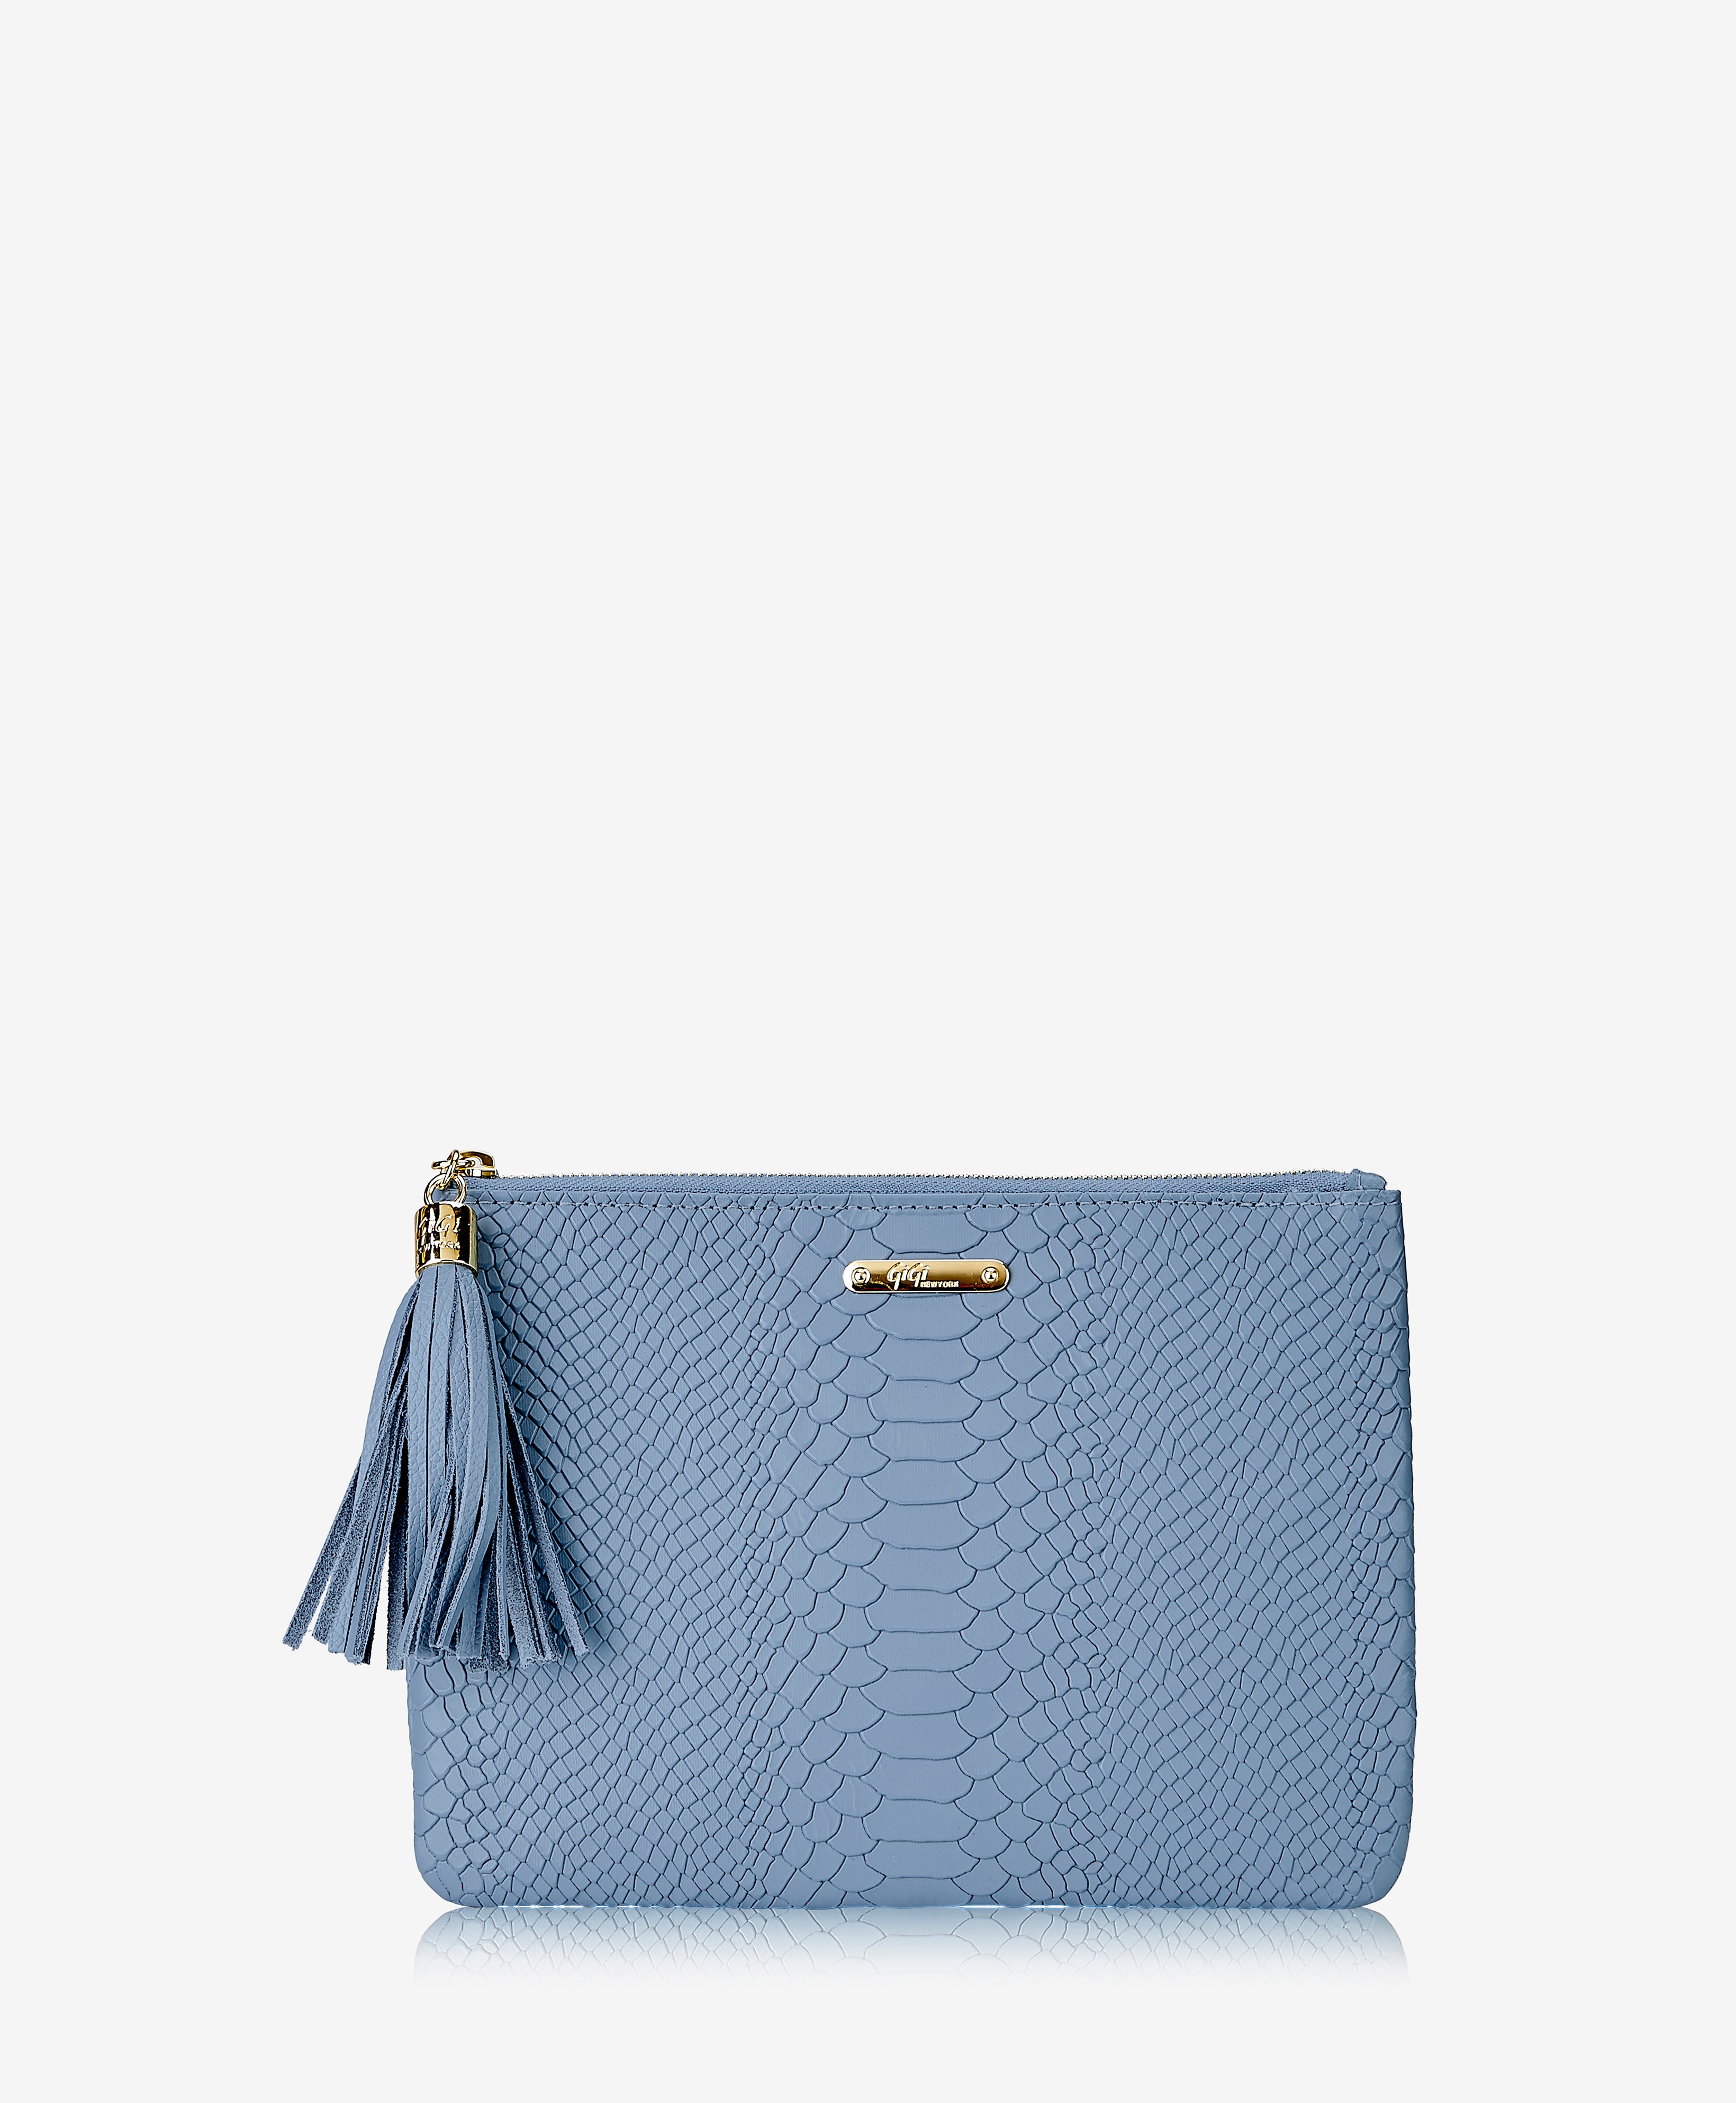 GiGi New York All In One Clutch Bag Slate Blue Embossed Python Leather